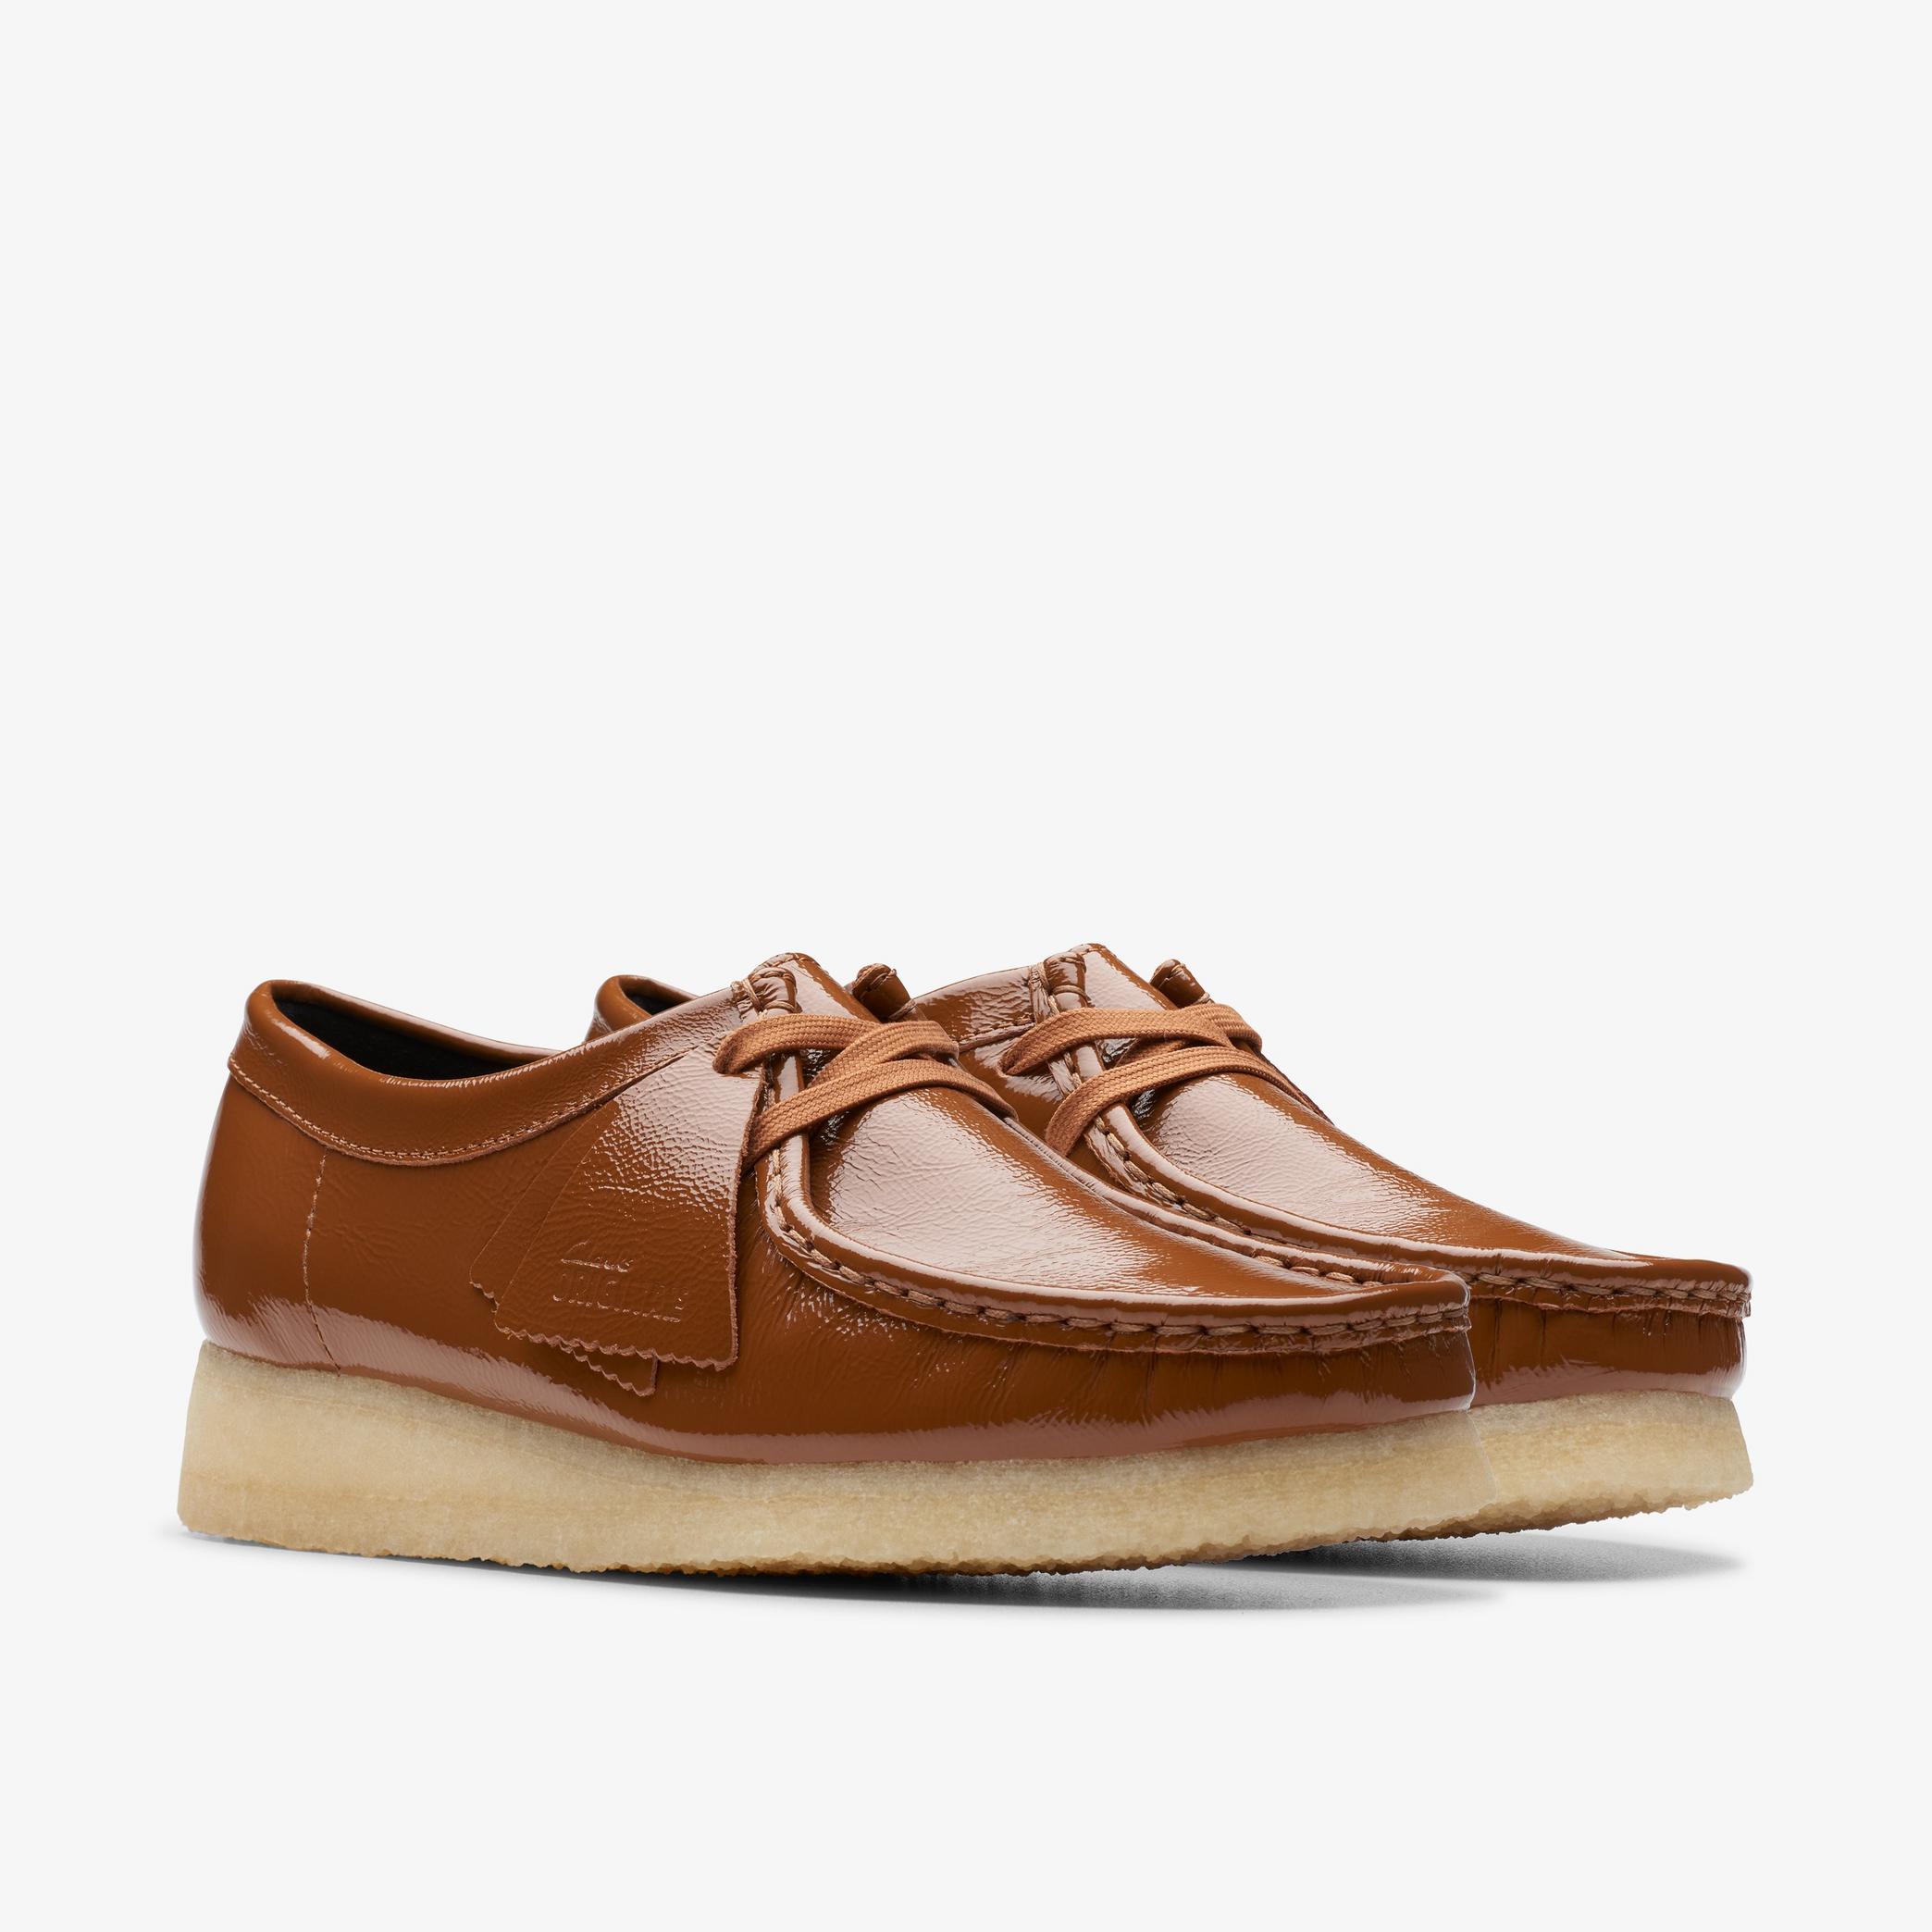 Wallabee Dusk Brown Patent Shoes, view 4 of 6